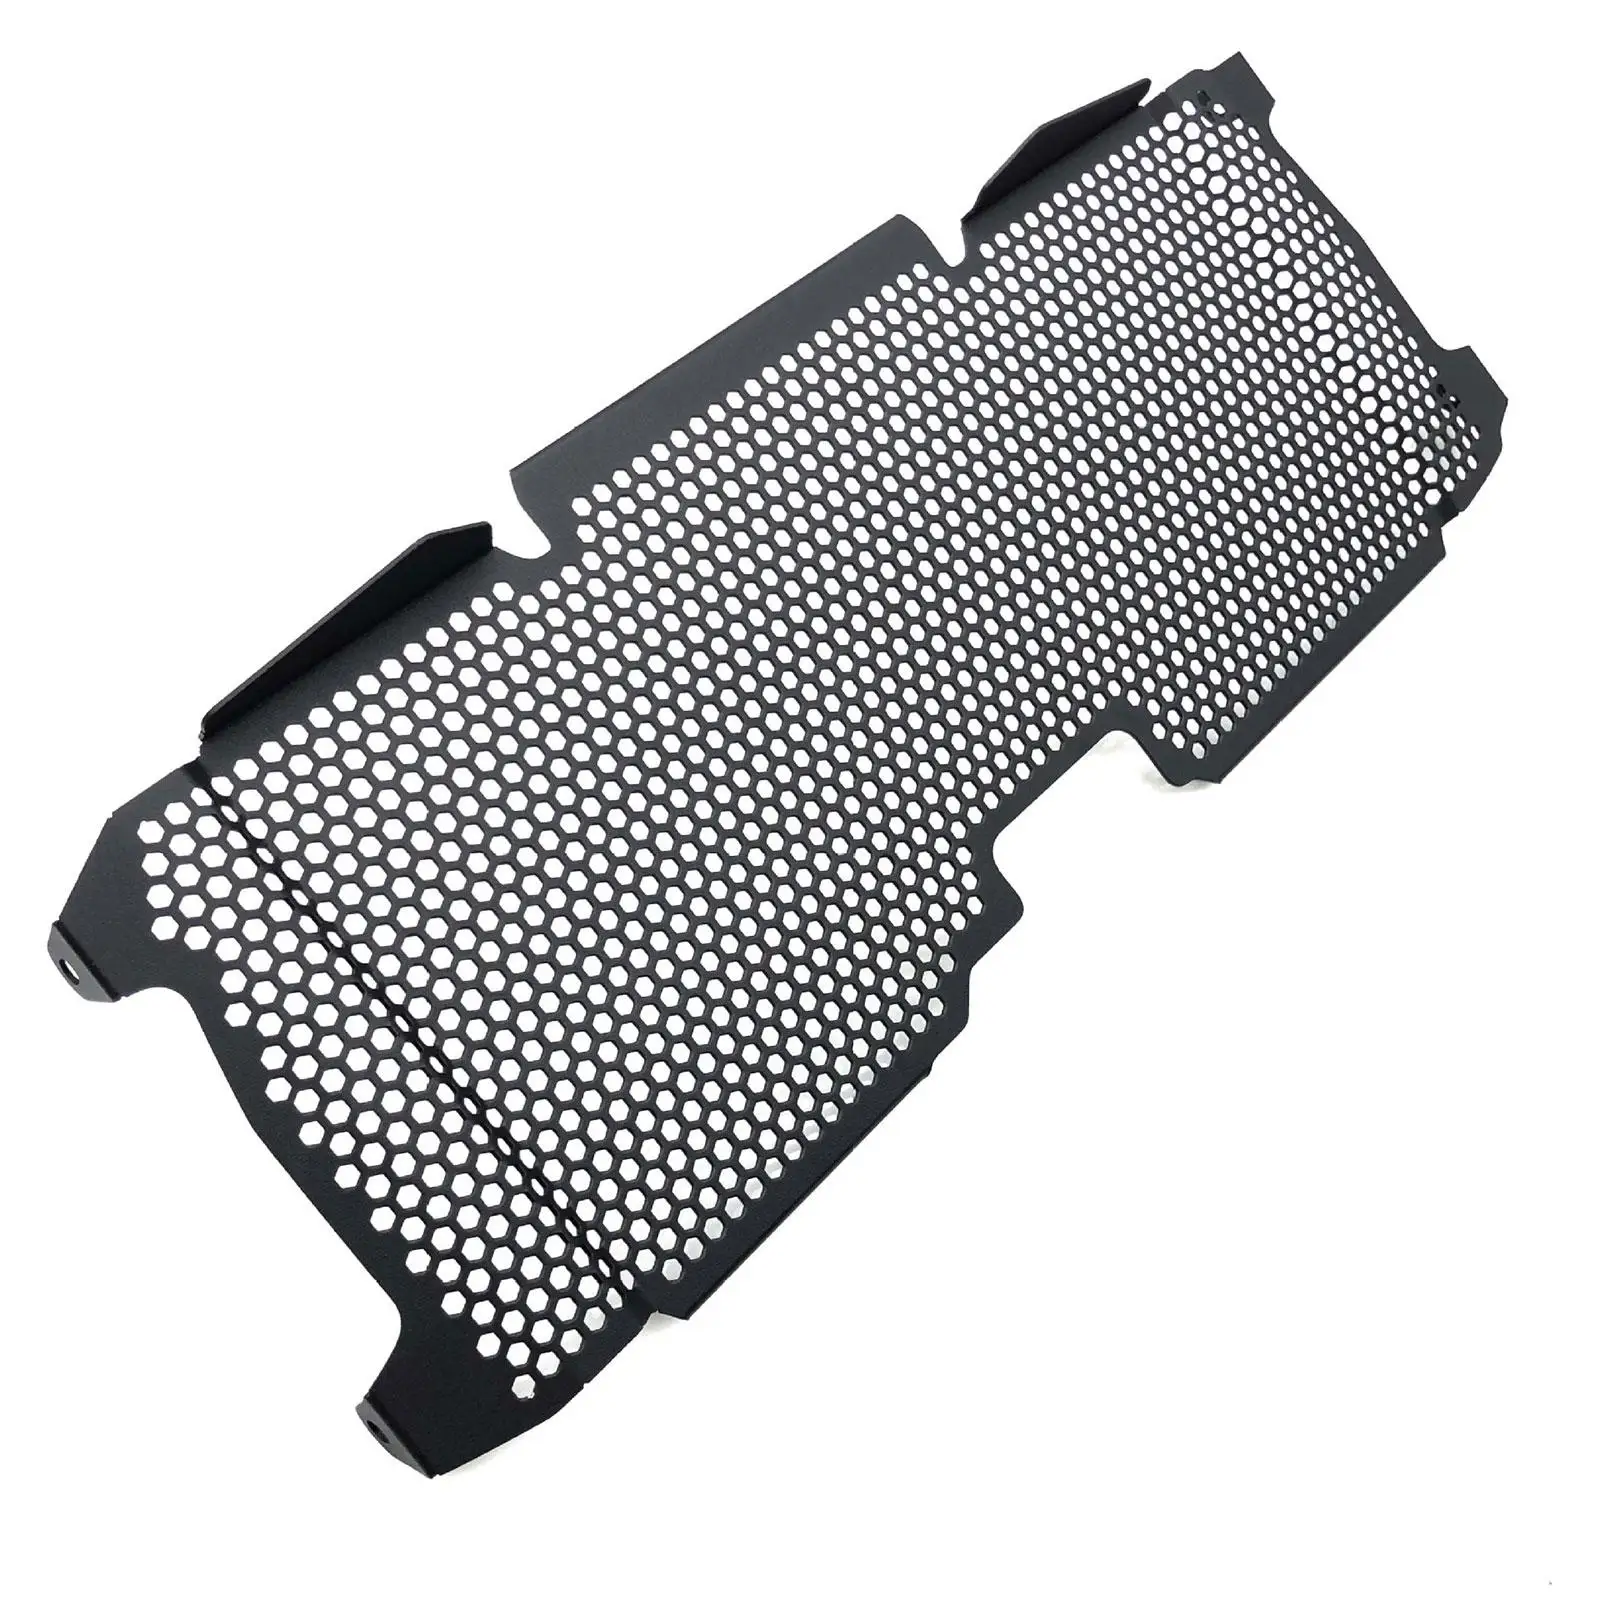 Radiator Grille Guard Protector Grill Cover Accessory for R1200RS 2015-2018